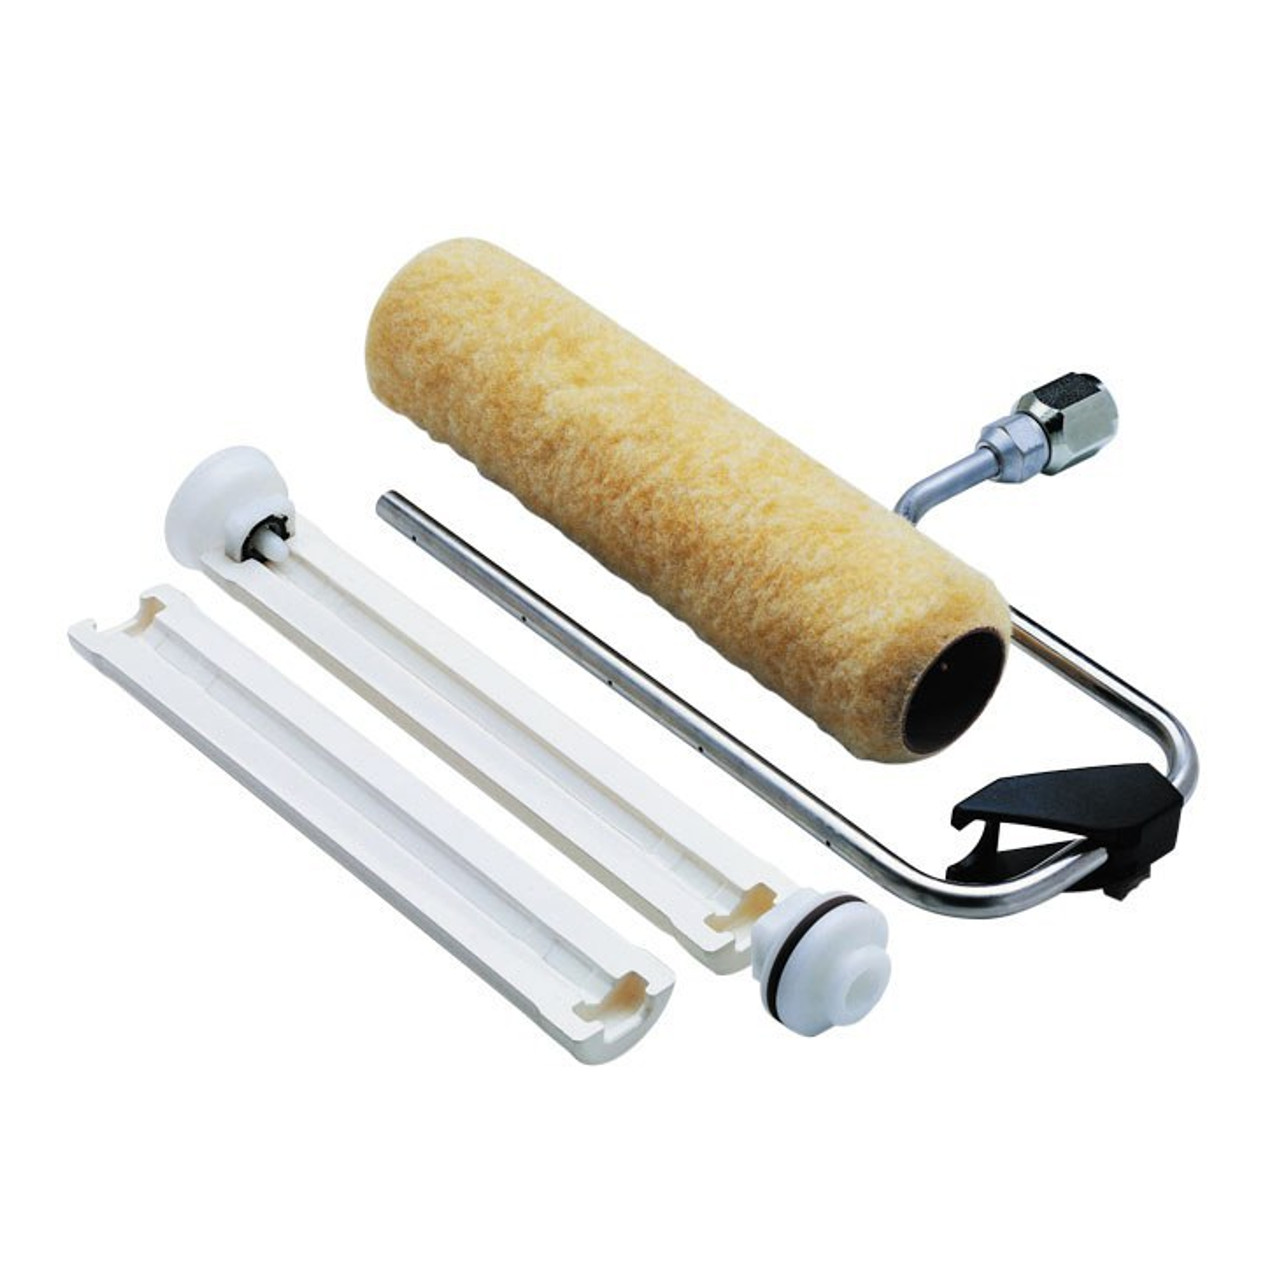 Airless Power Roller and Accessories